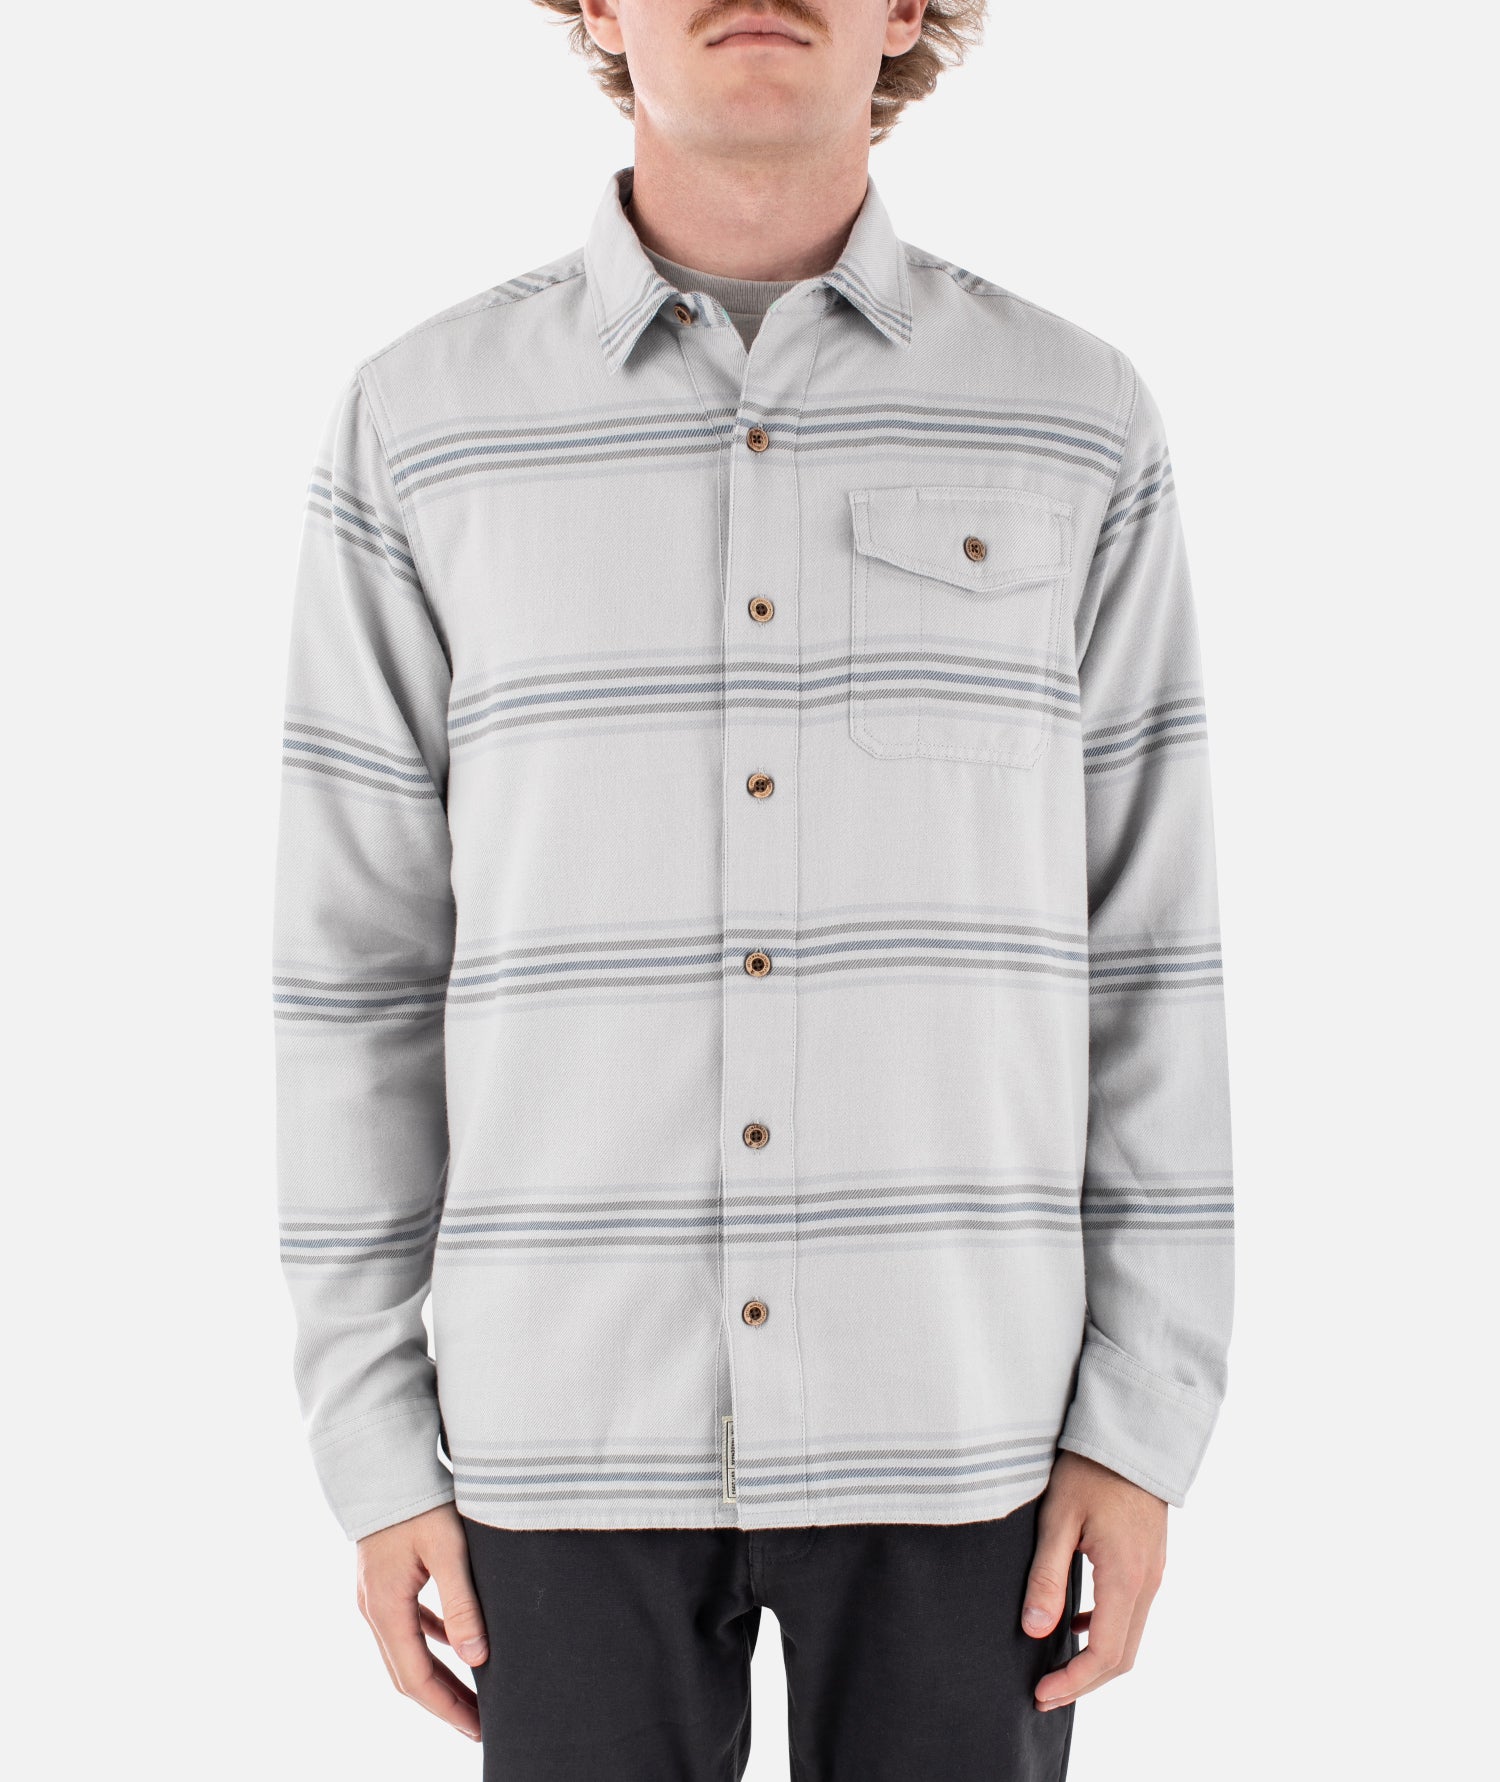 Essex Oyster Twill Shirt - Multiple Styles - Storm and Sky Shoppe - Jetty